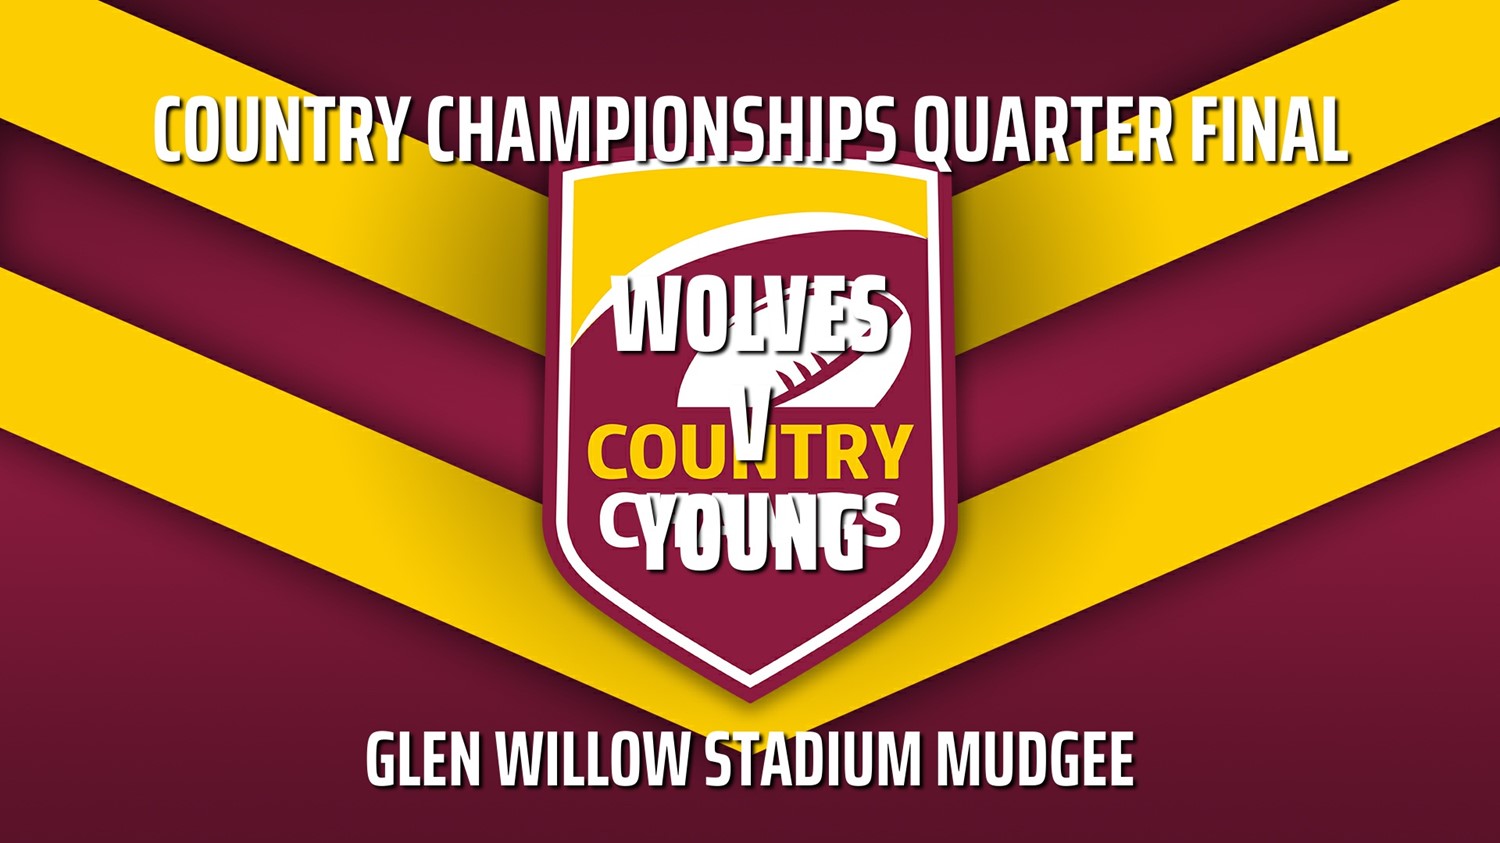 231015-Country Championships Quarter Final - Mixed Open - Wallsend Wolves v Young Minigame Slate Image